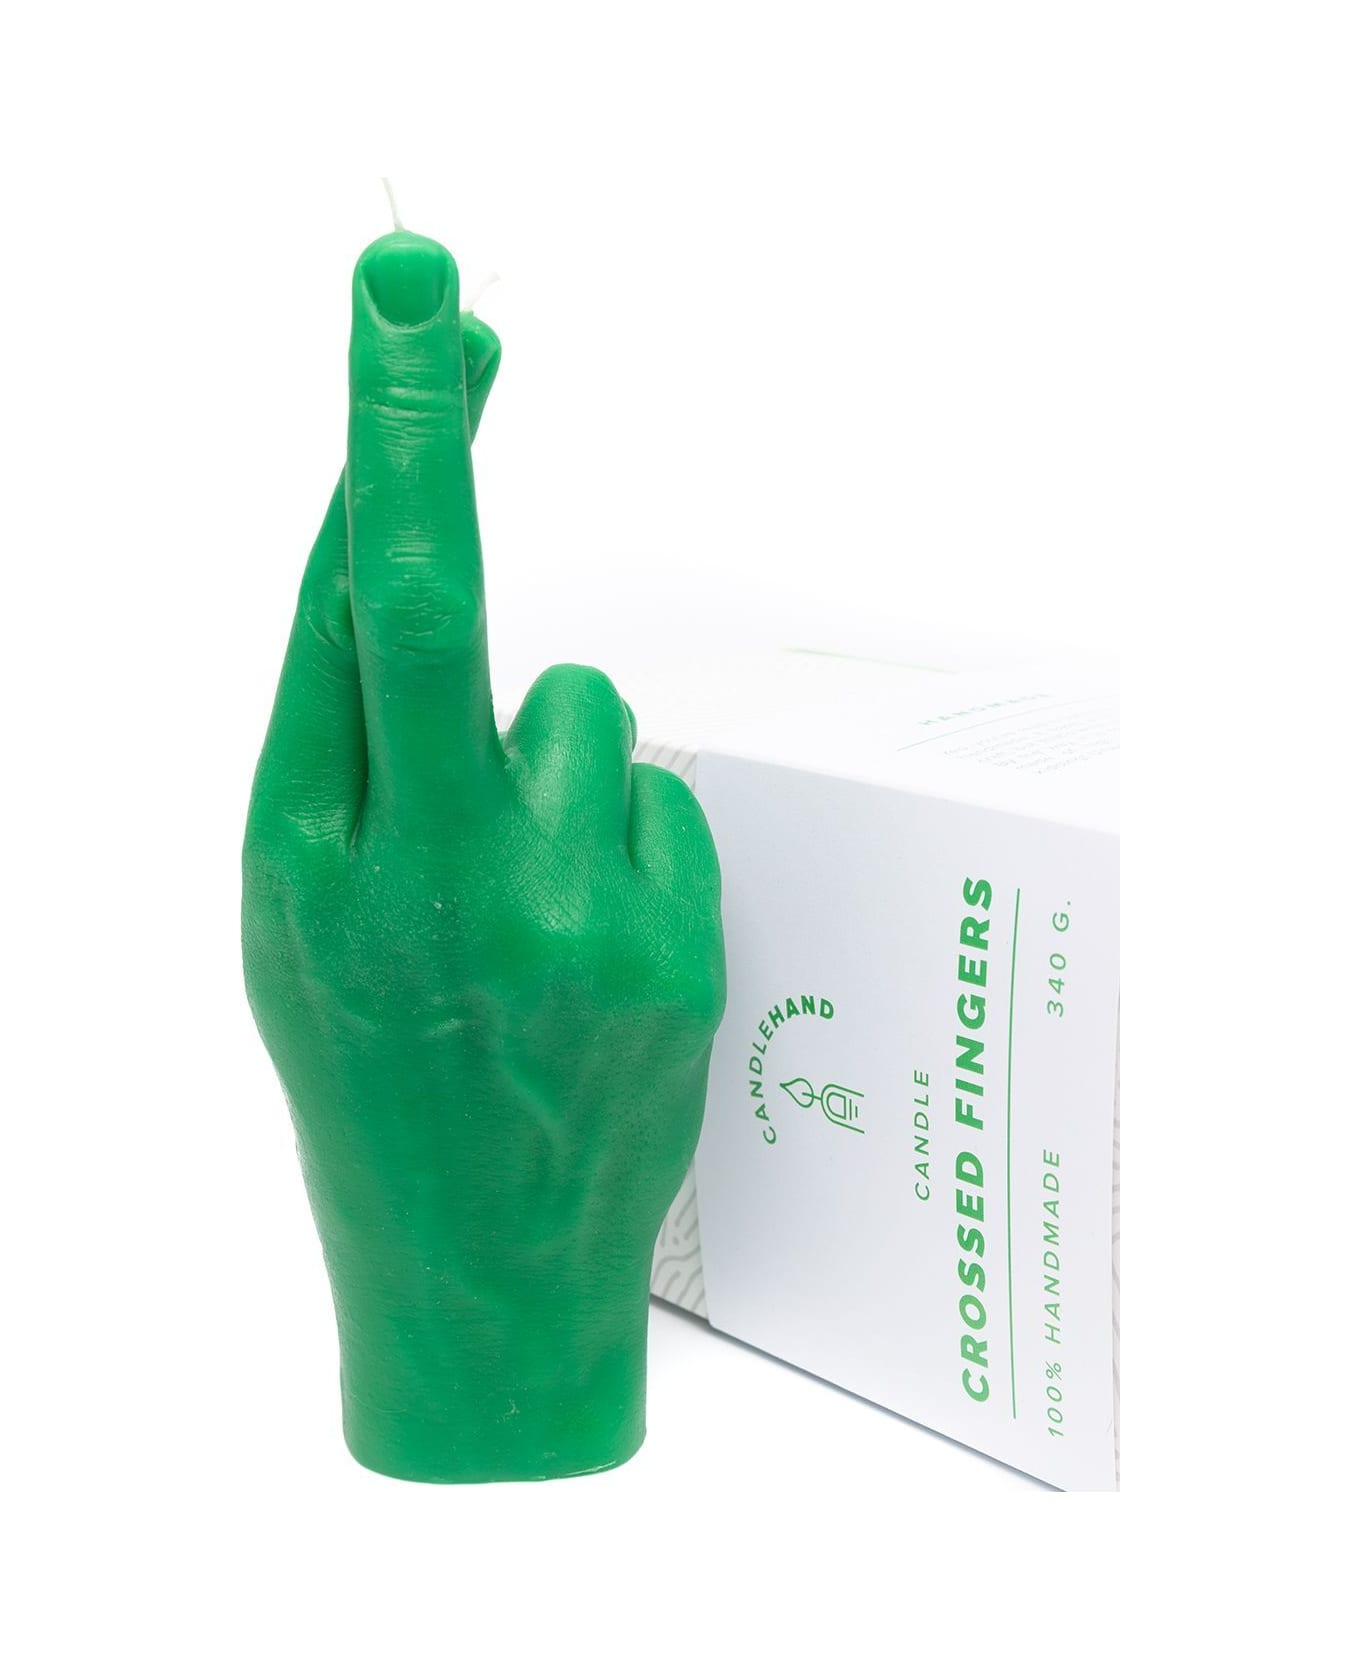 Candlehand Crossed Fingers Candle - Green